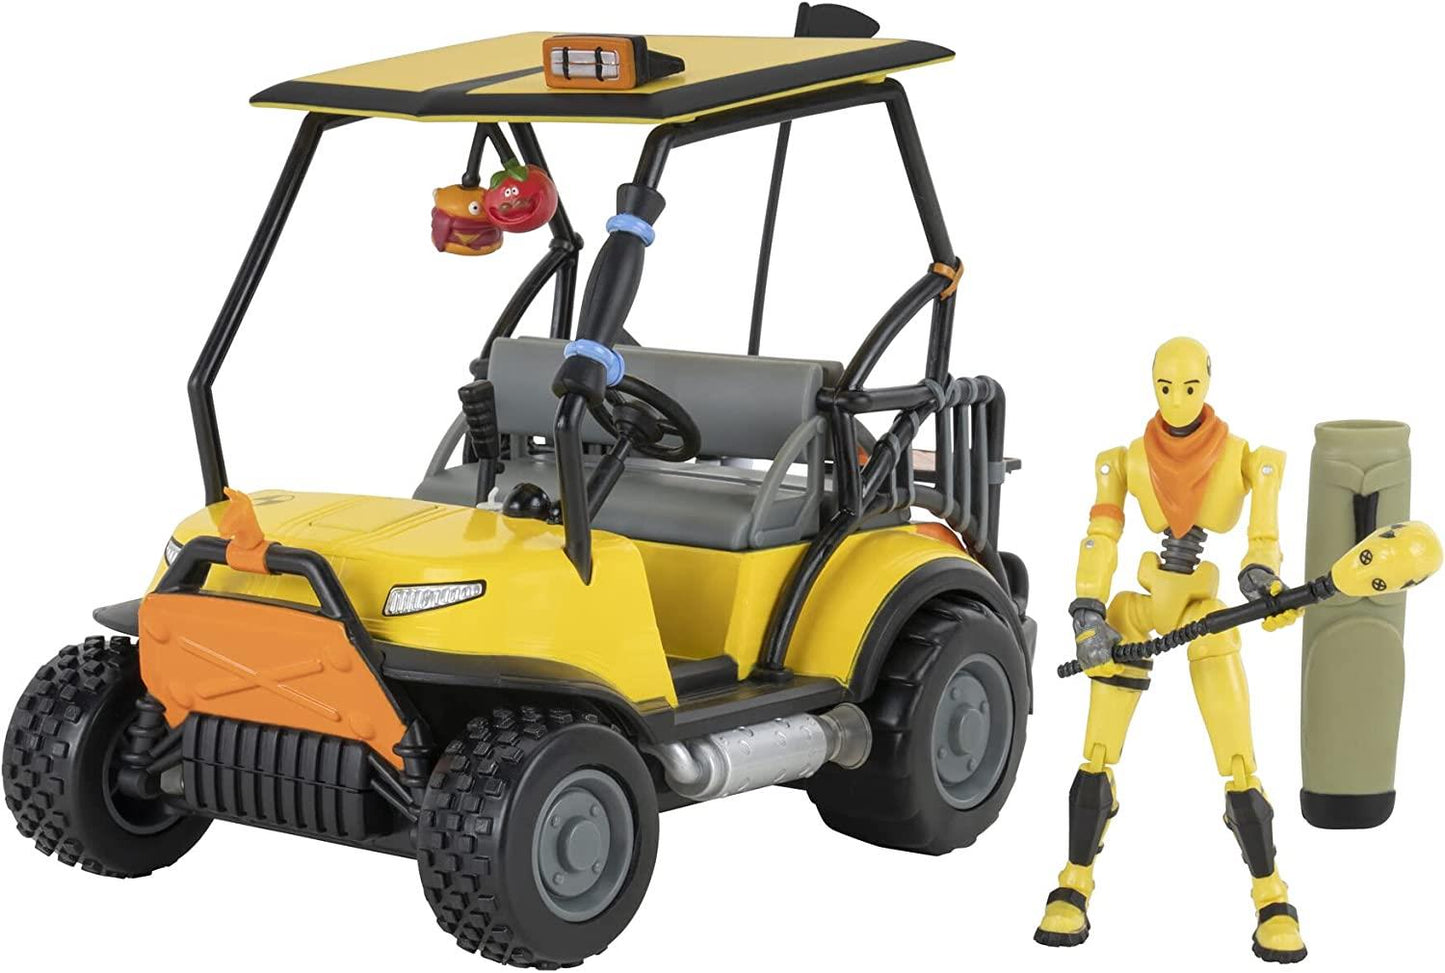 Fortnite ATK Crash Test Deluxe Feature Véhicule Playset FNT0851